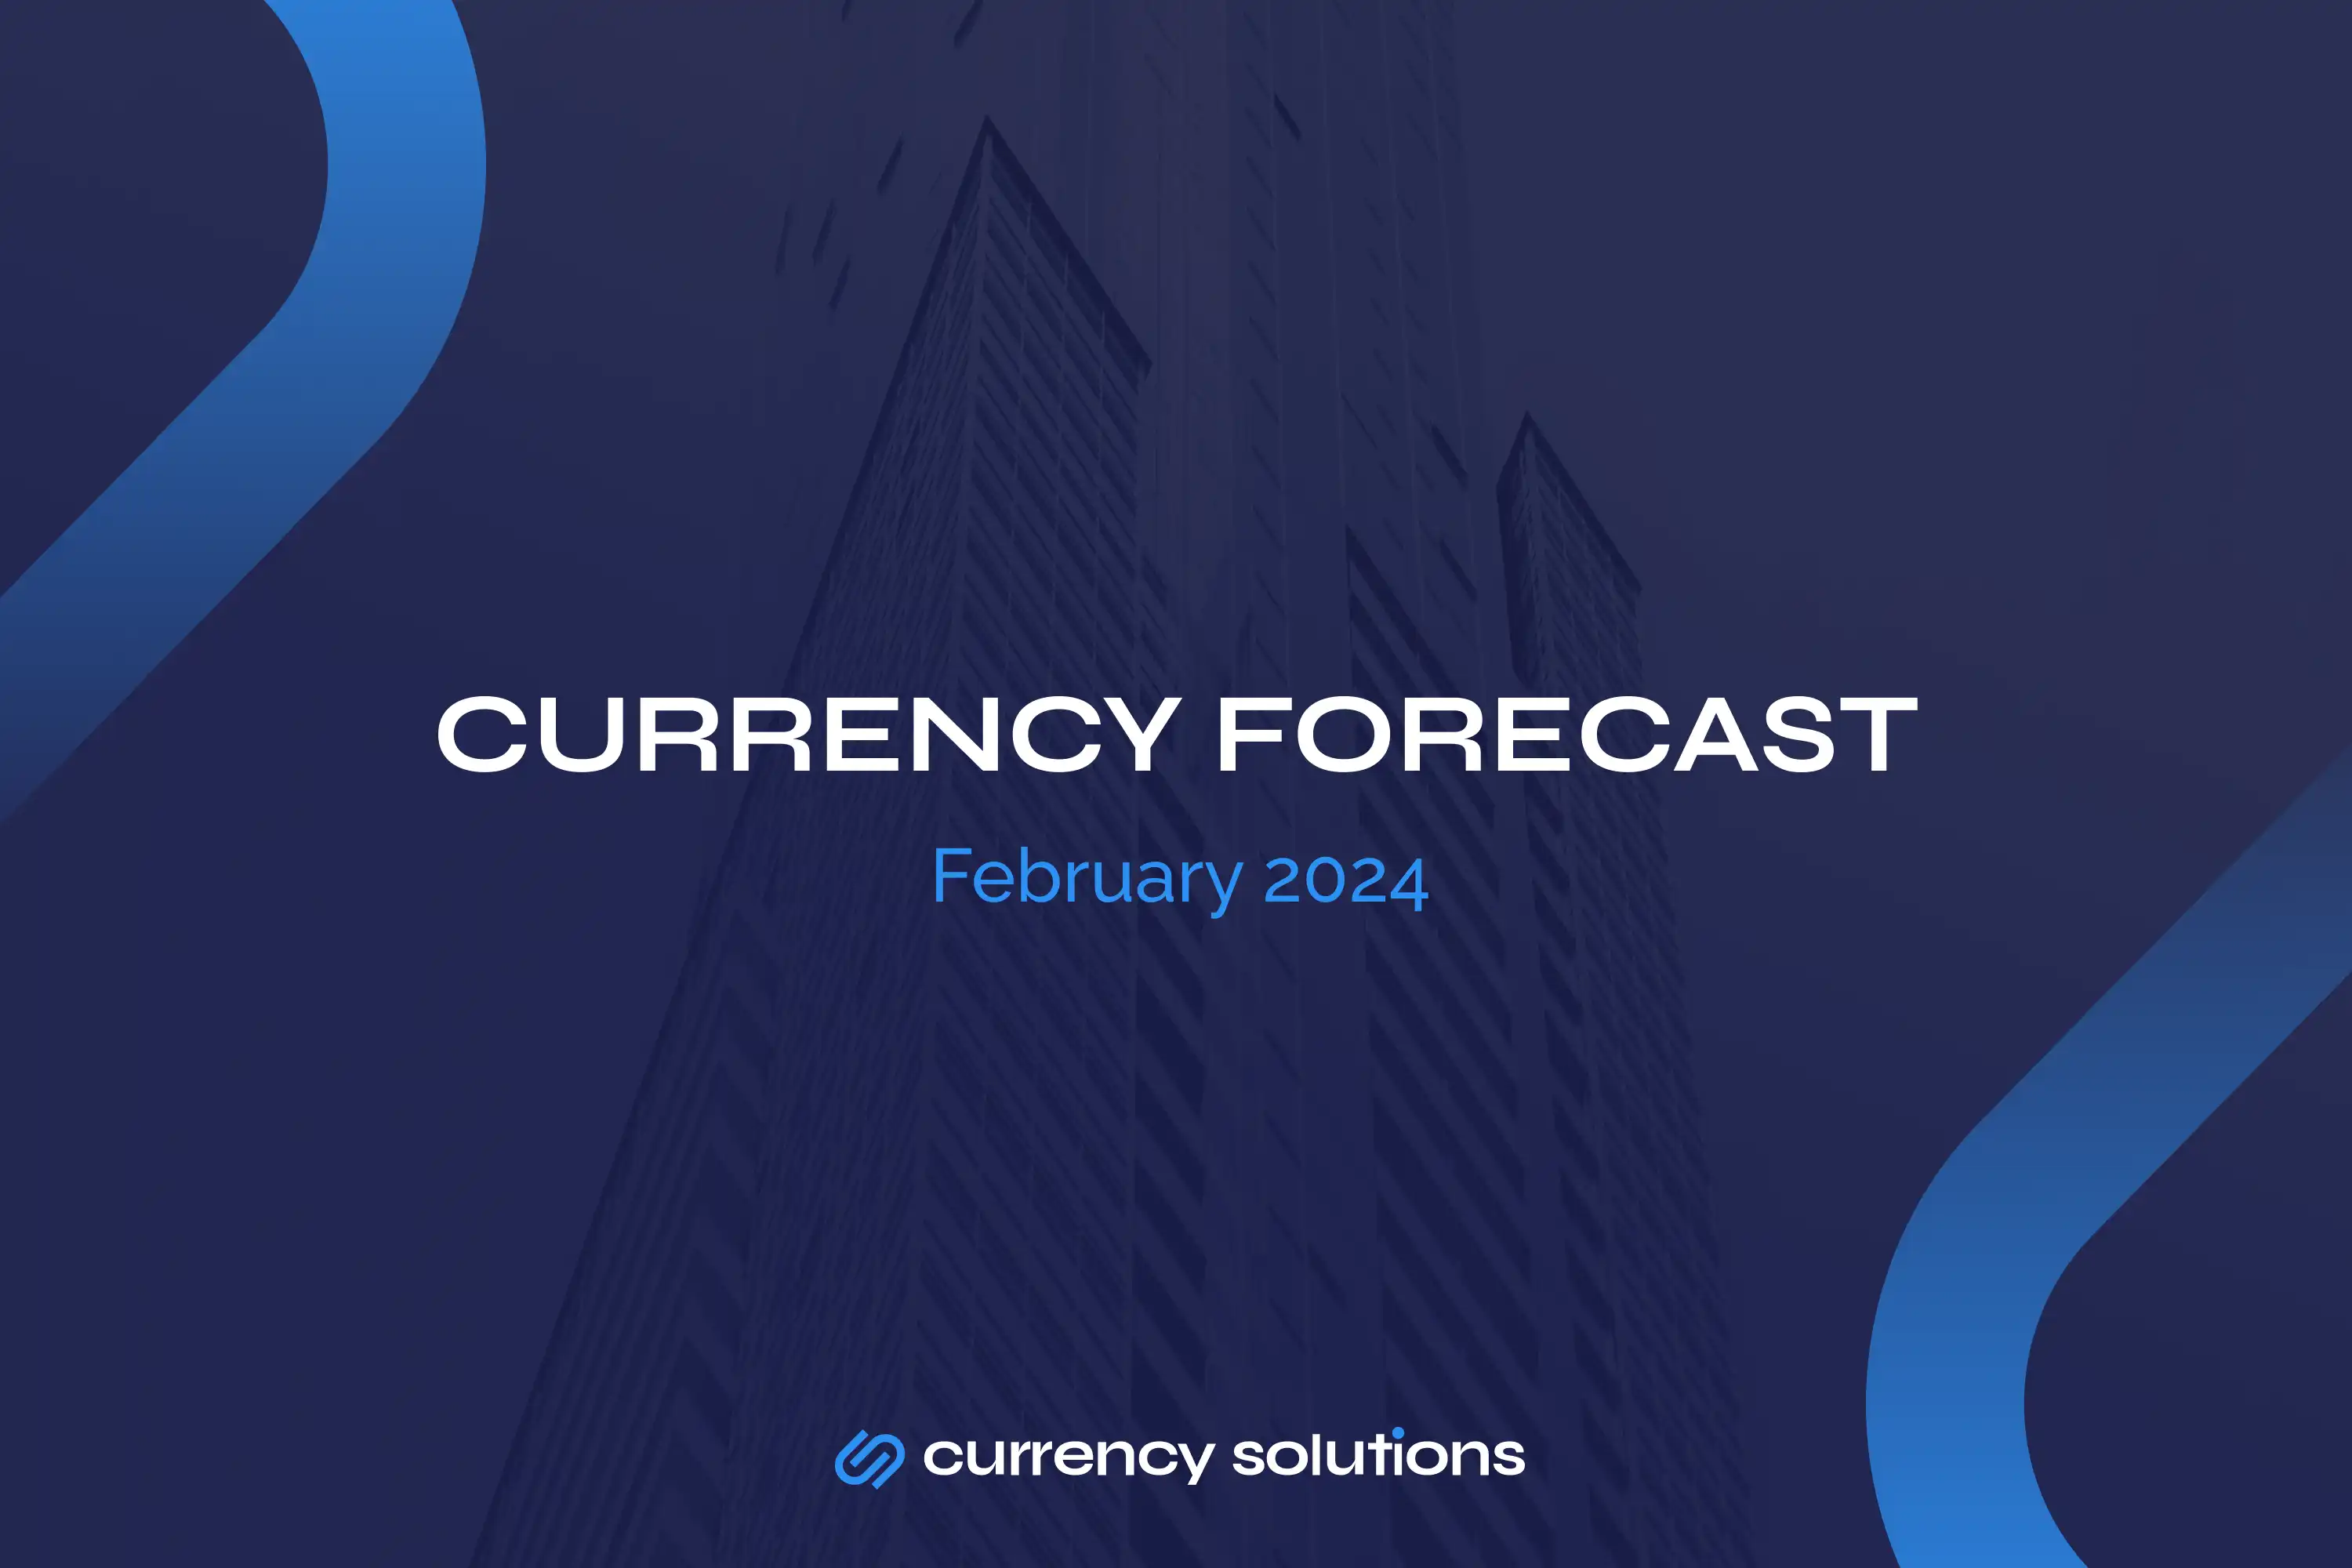 Currency Solutions - February 2024 Currency Forecast